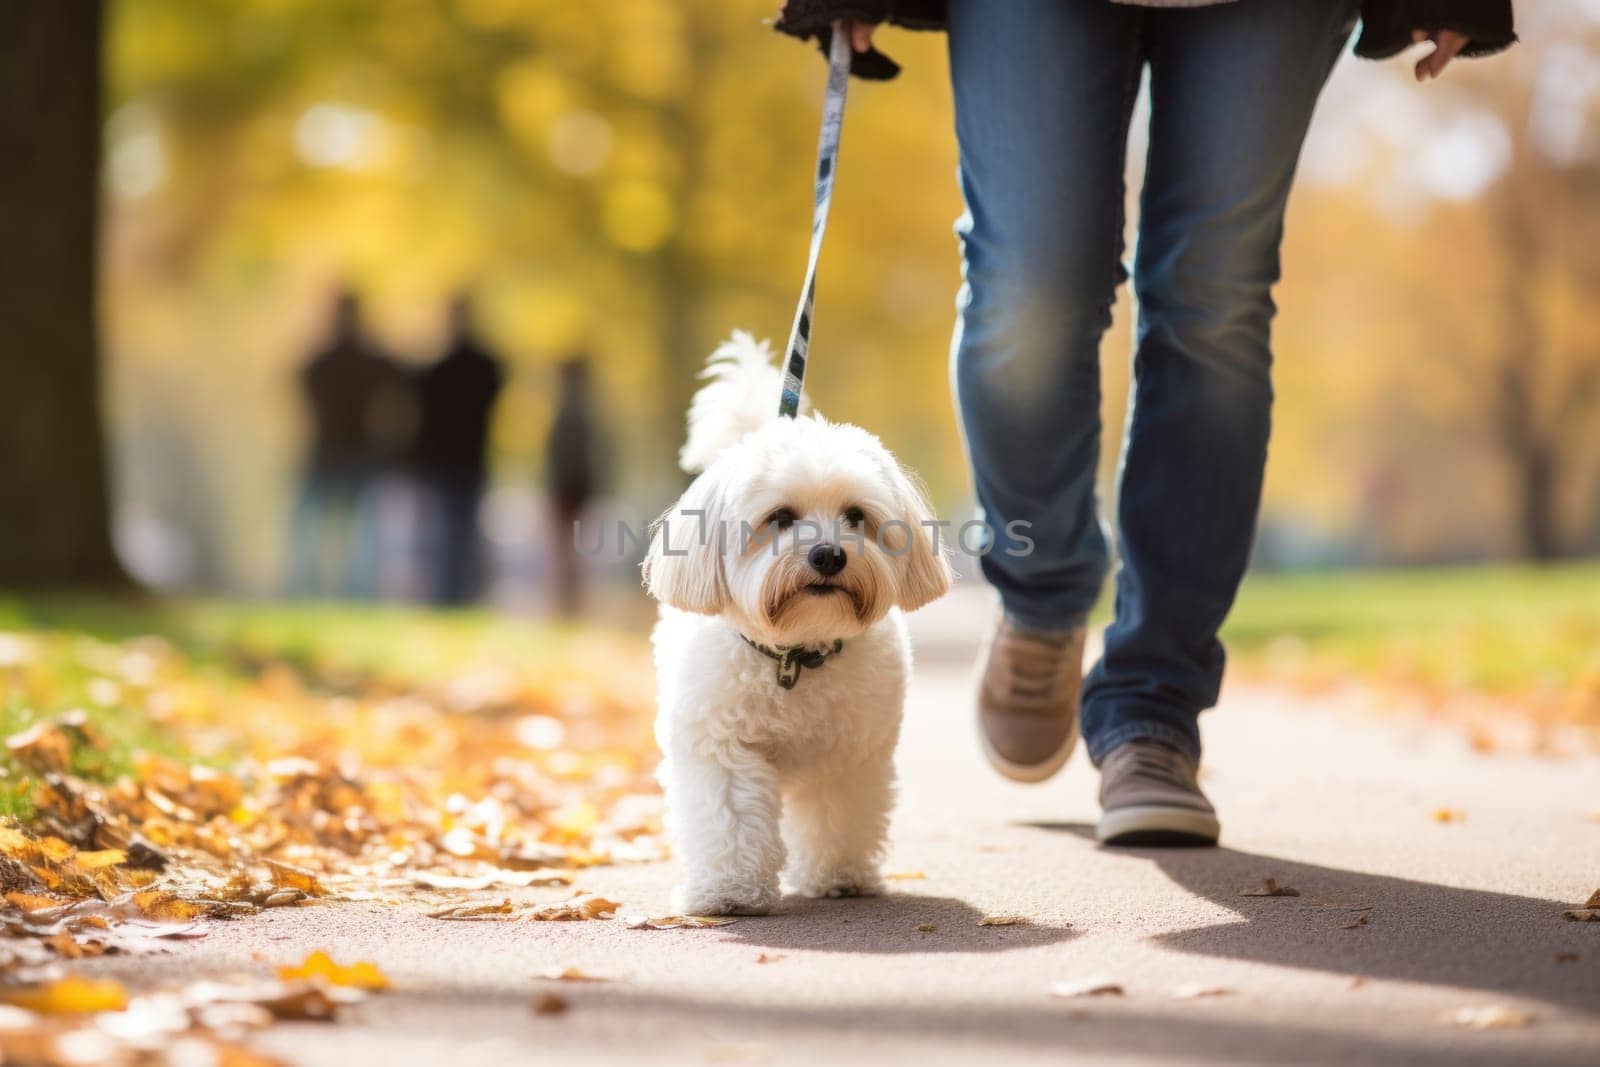 image of a person walking a pet dog in a city park on a sunny autumn day by nijieimu